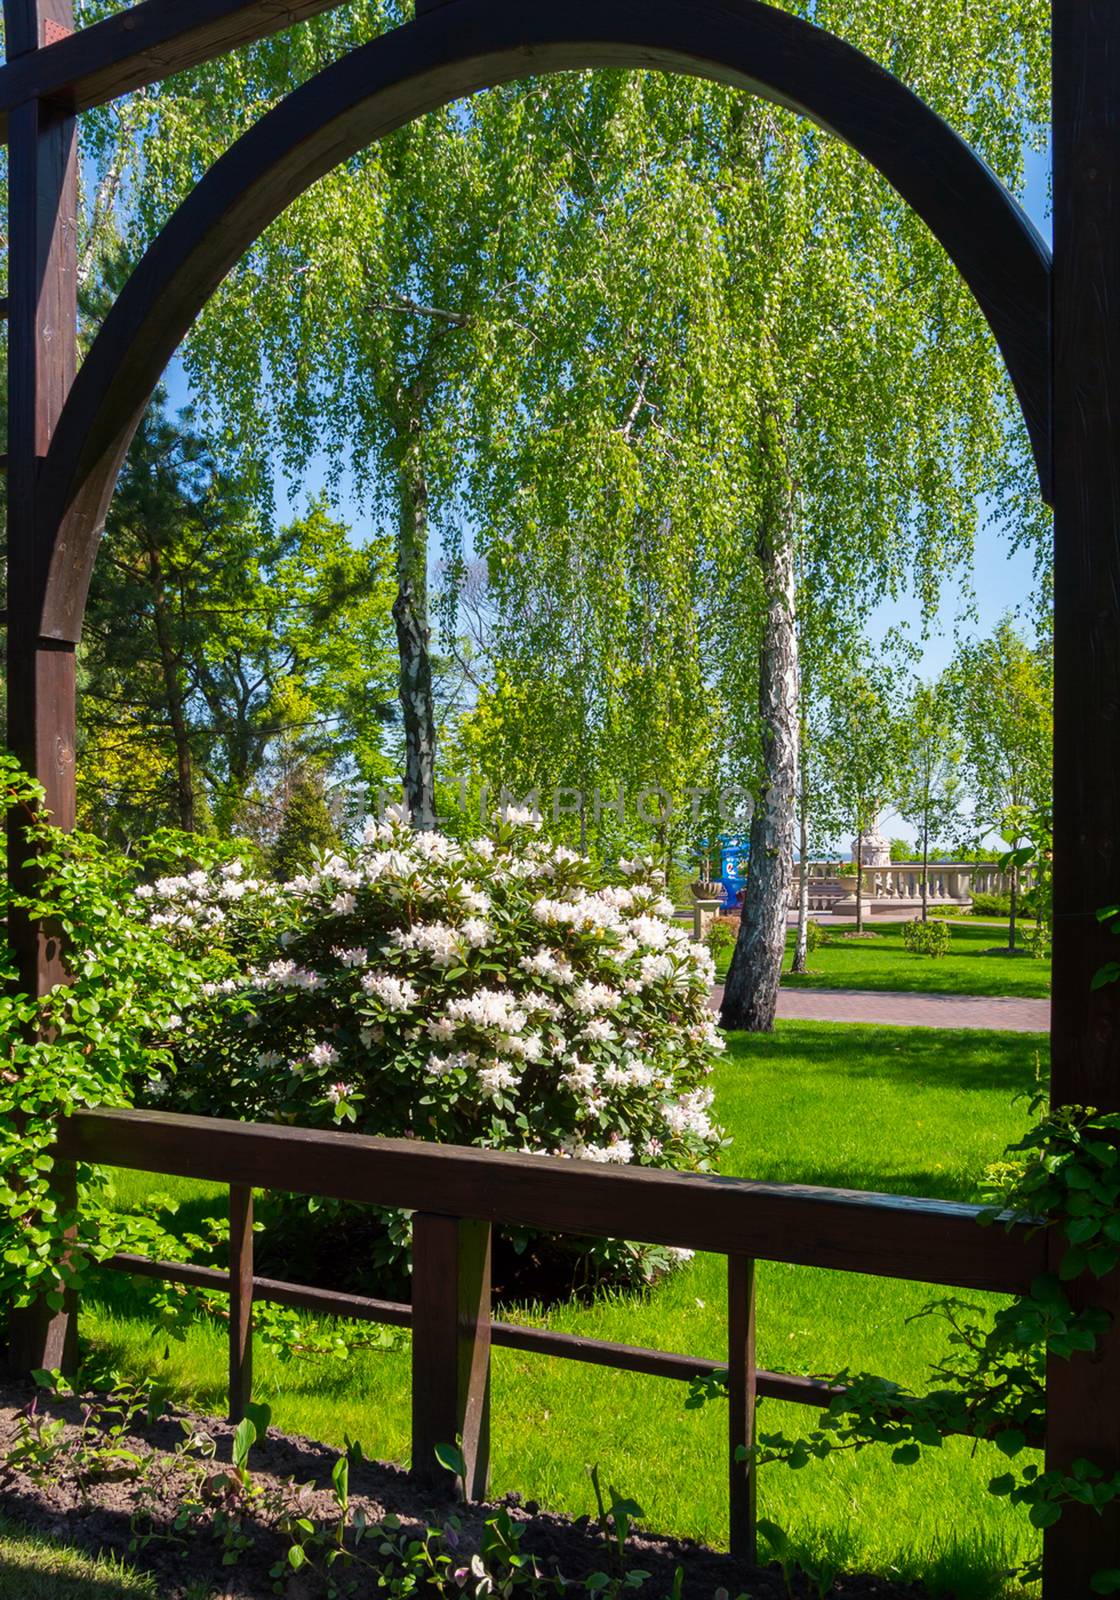 Fence with a small arch leading to a green garden with flowering bushes with white flowers